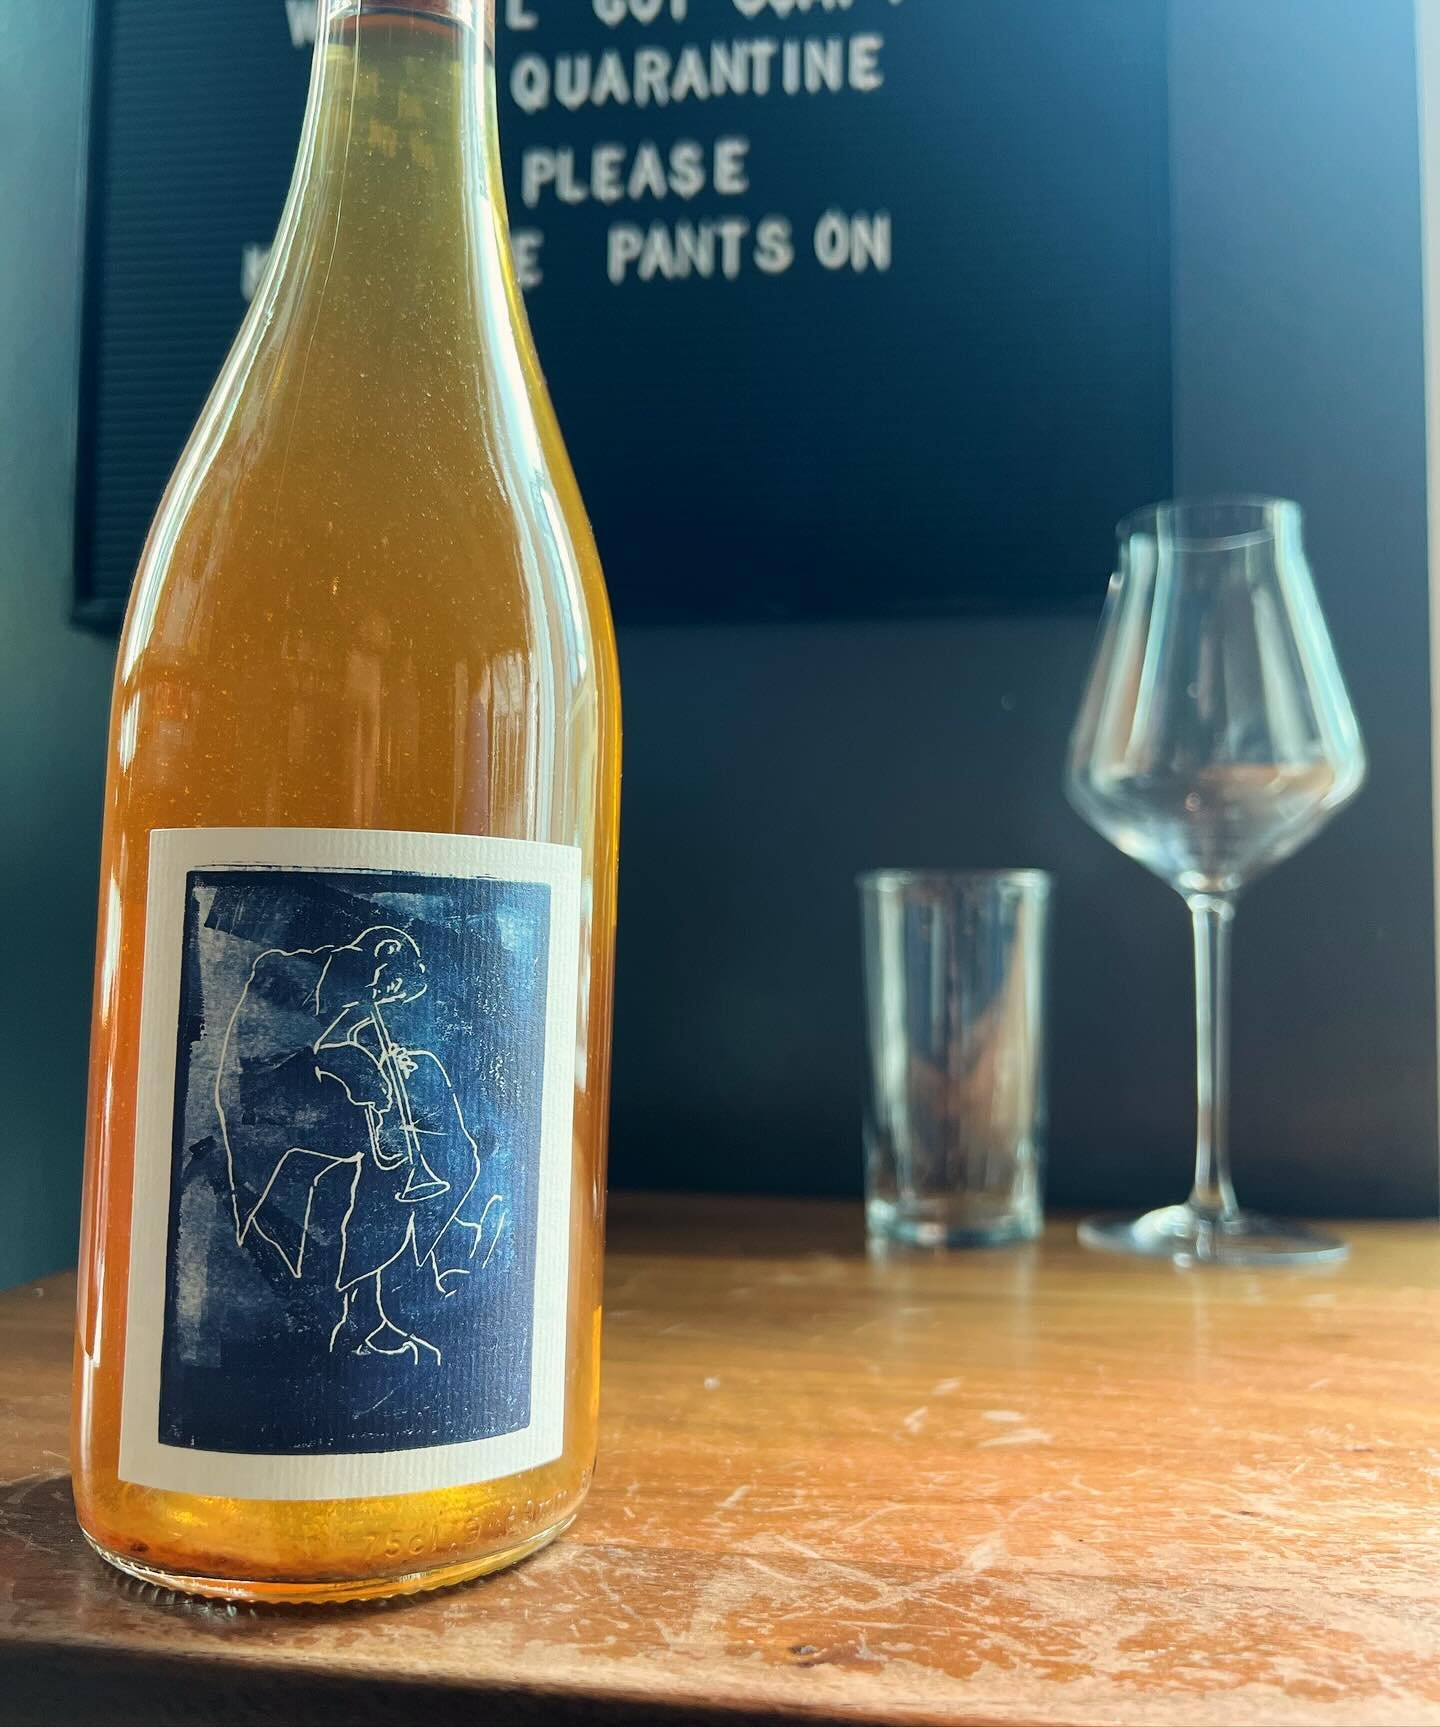 Gew&uuml;rztraminer shines in all of its aromatic  glory with this killer vino from NY winemakers @barbichettewines  Come snag a glass and sink away as if nothing else in the world really matters......🫠🫠🫠🫠🫠🫠🫠🫠

#vinoweknow #chettebaker #barbi